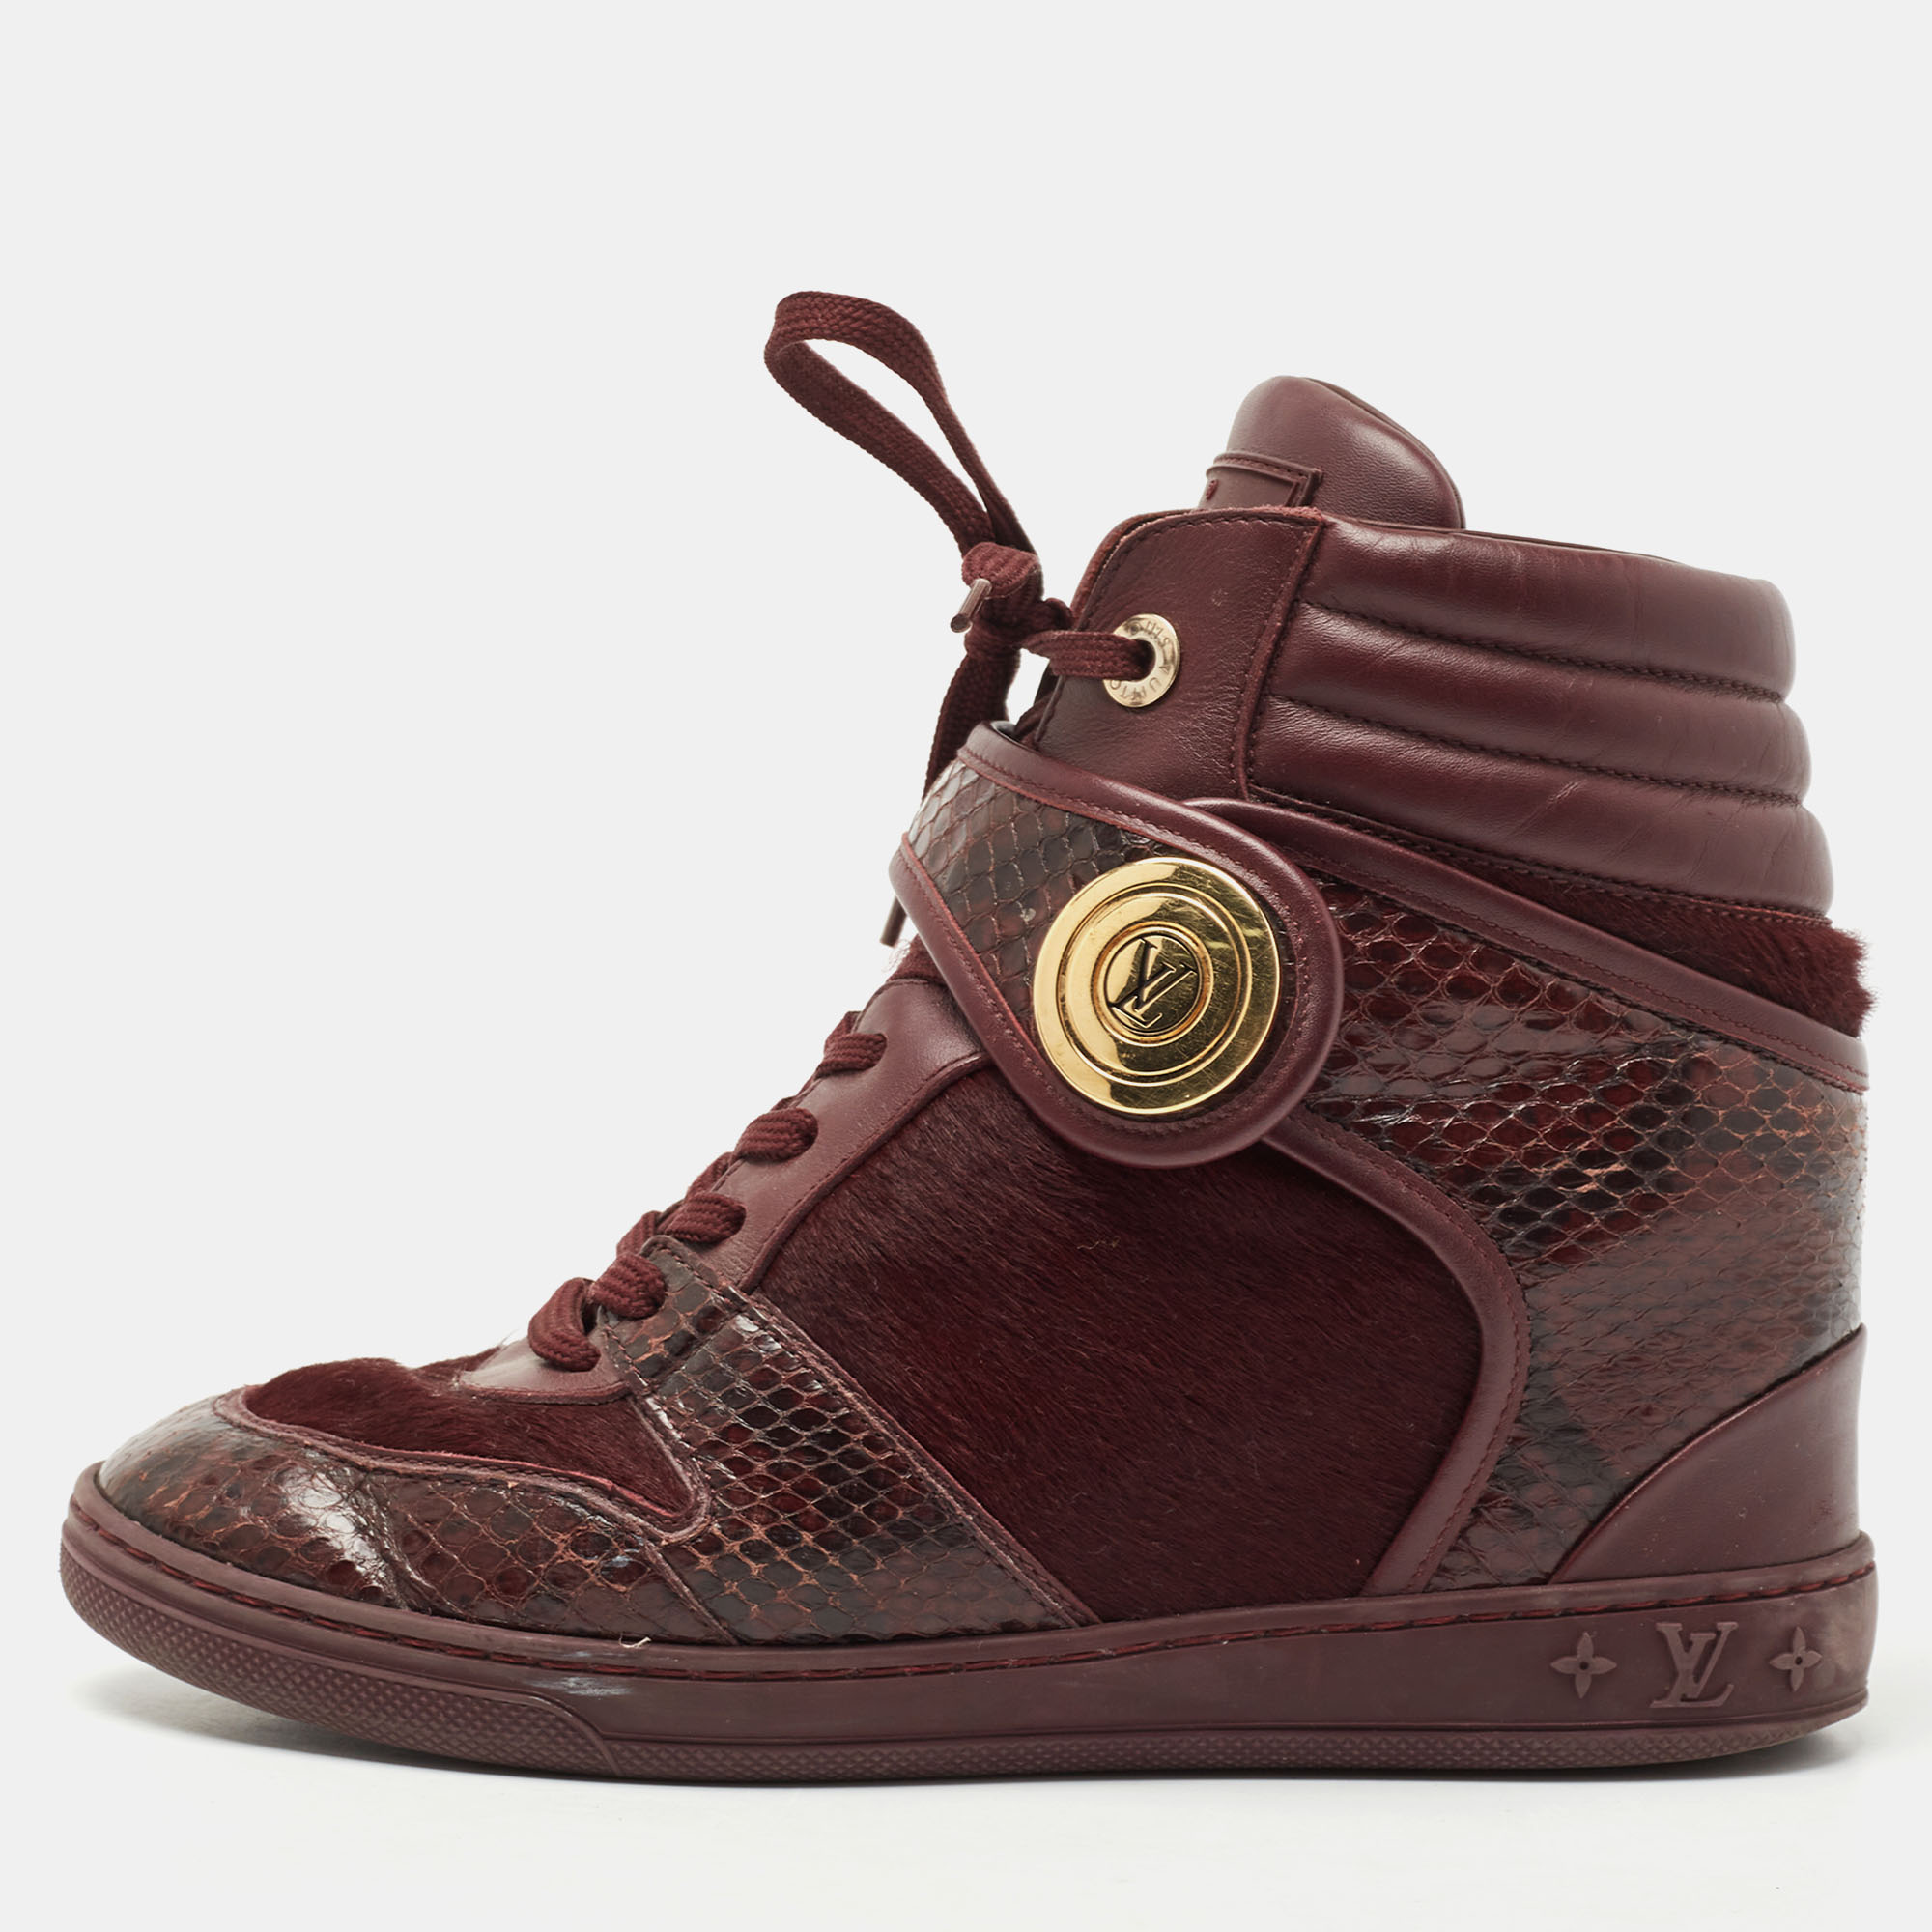 Louis Vuitton Burgundy Calf Hair And Python Leather High Top Sneakers Size 37.5